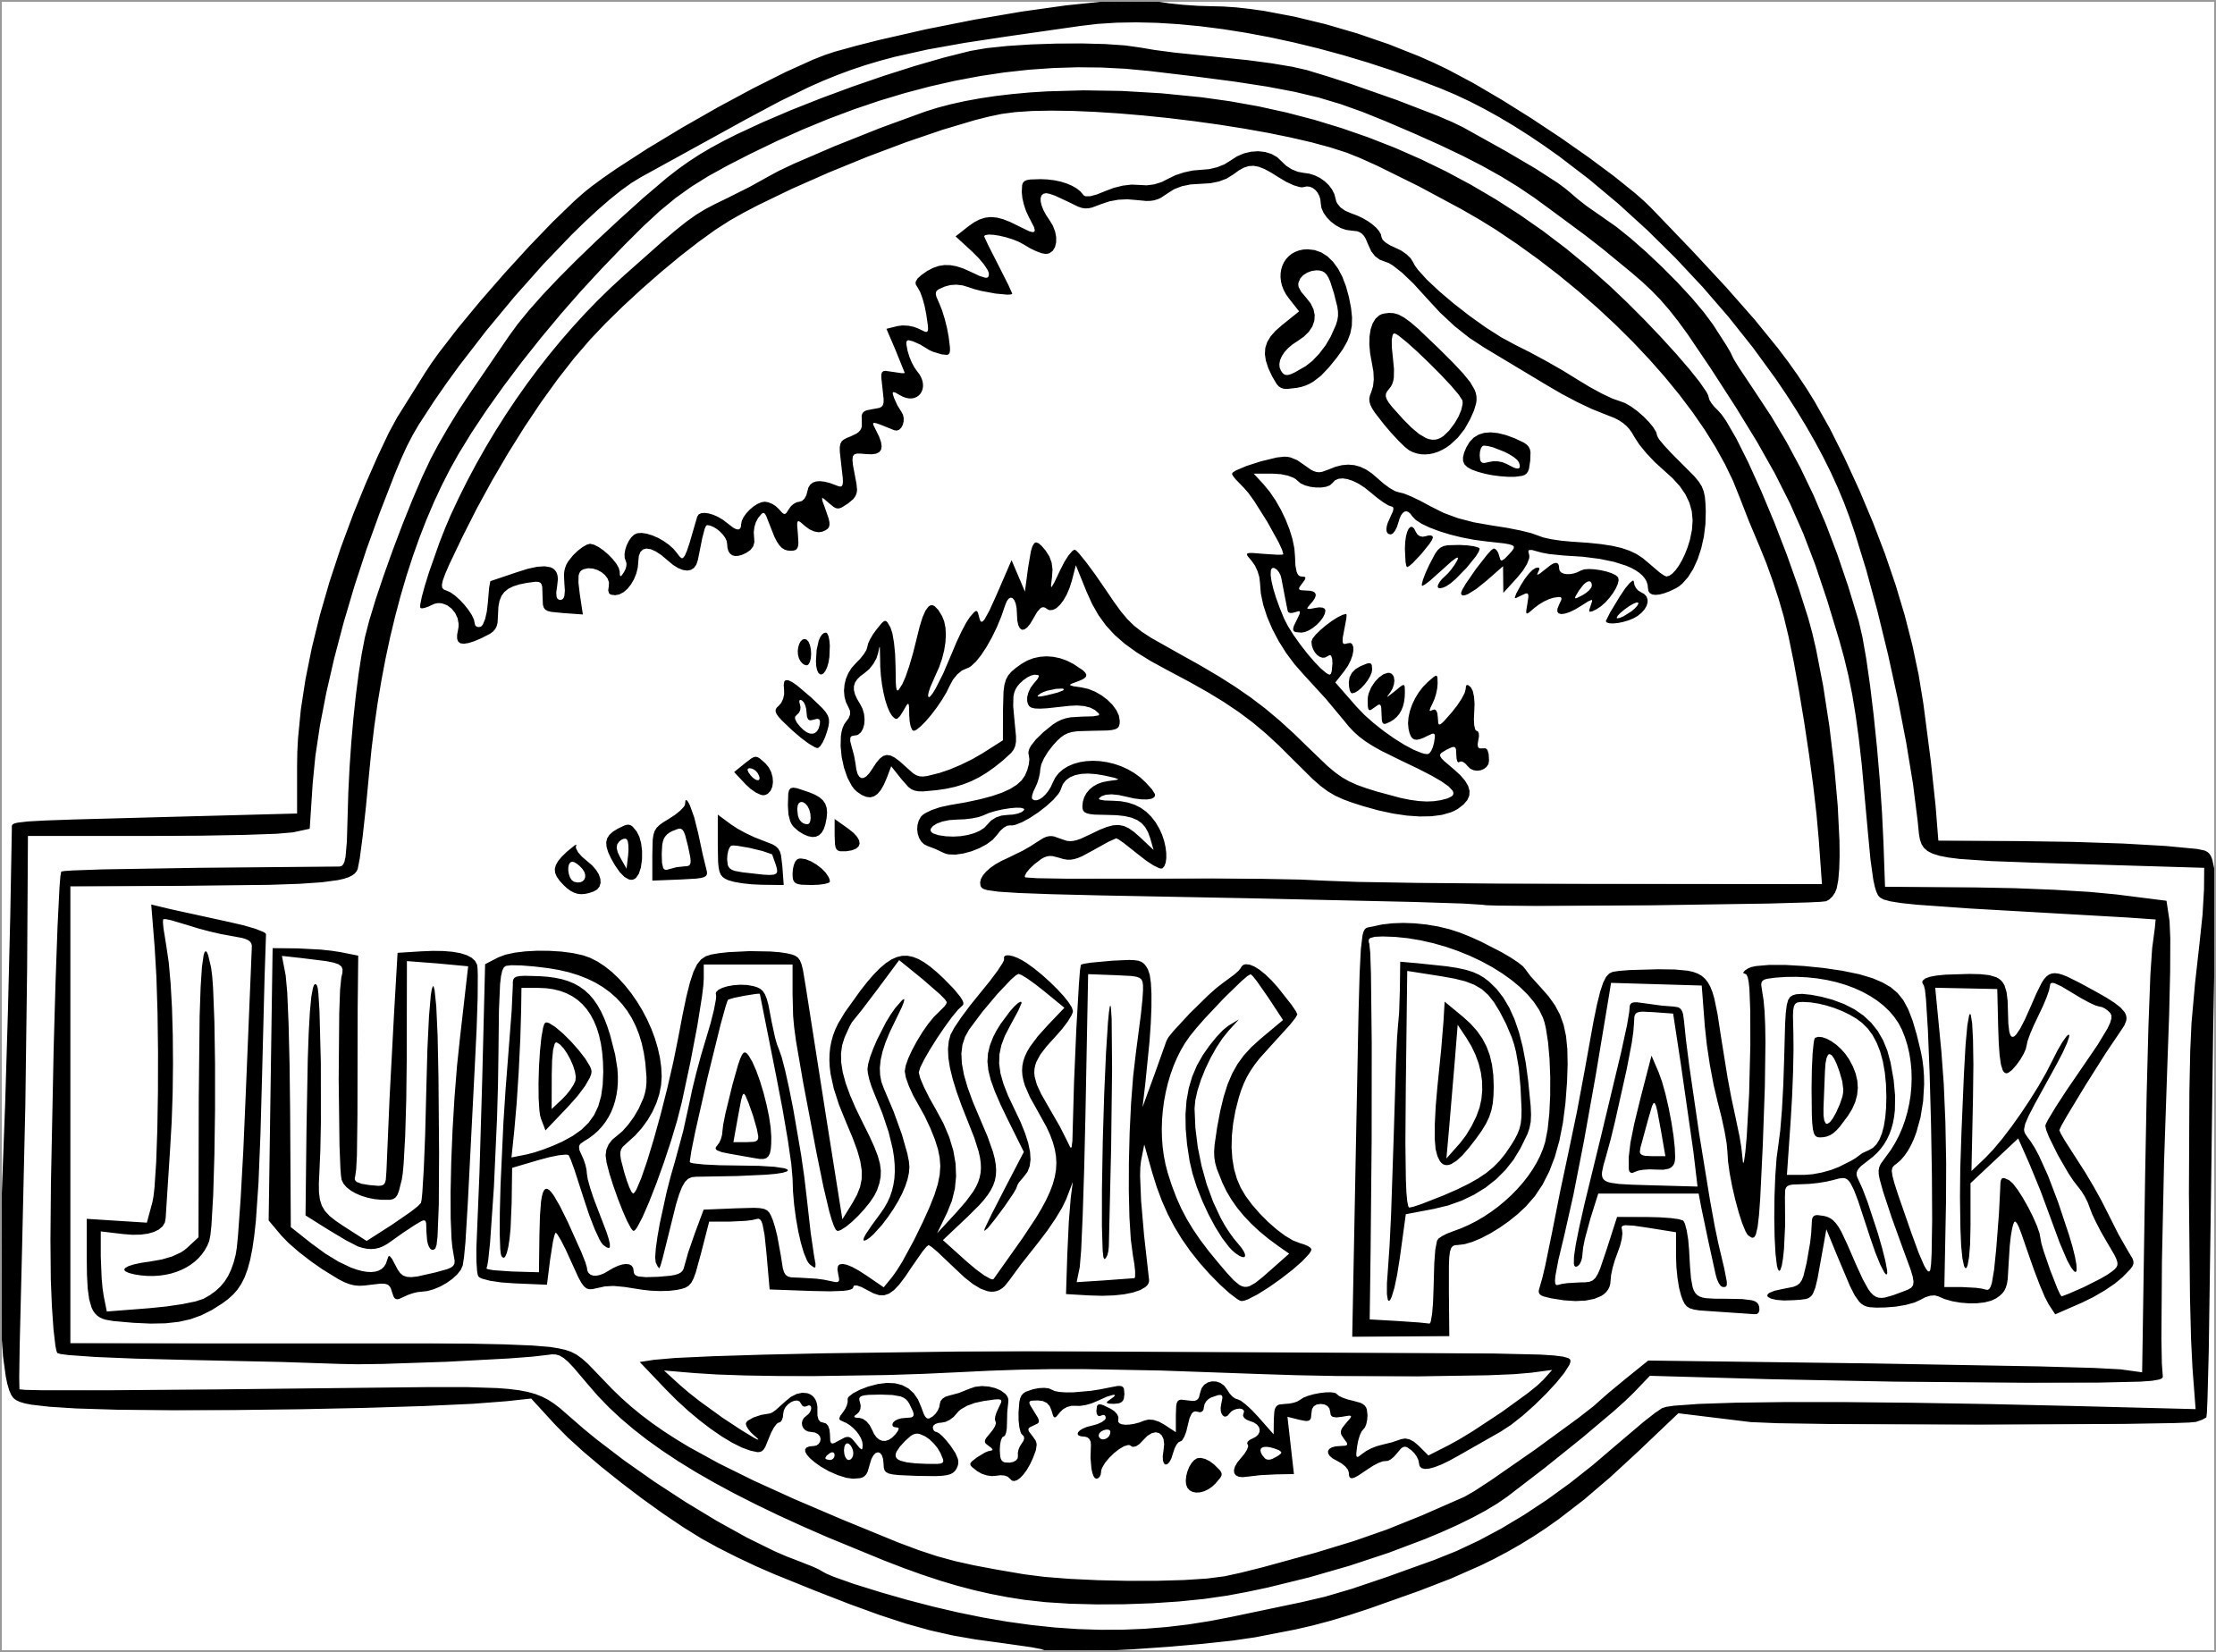 Jurassic Park Coloring Pages